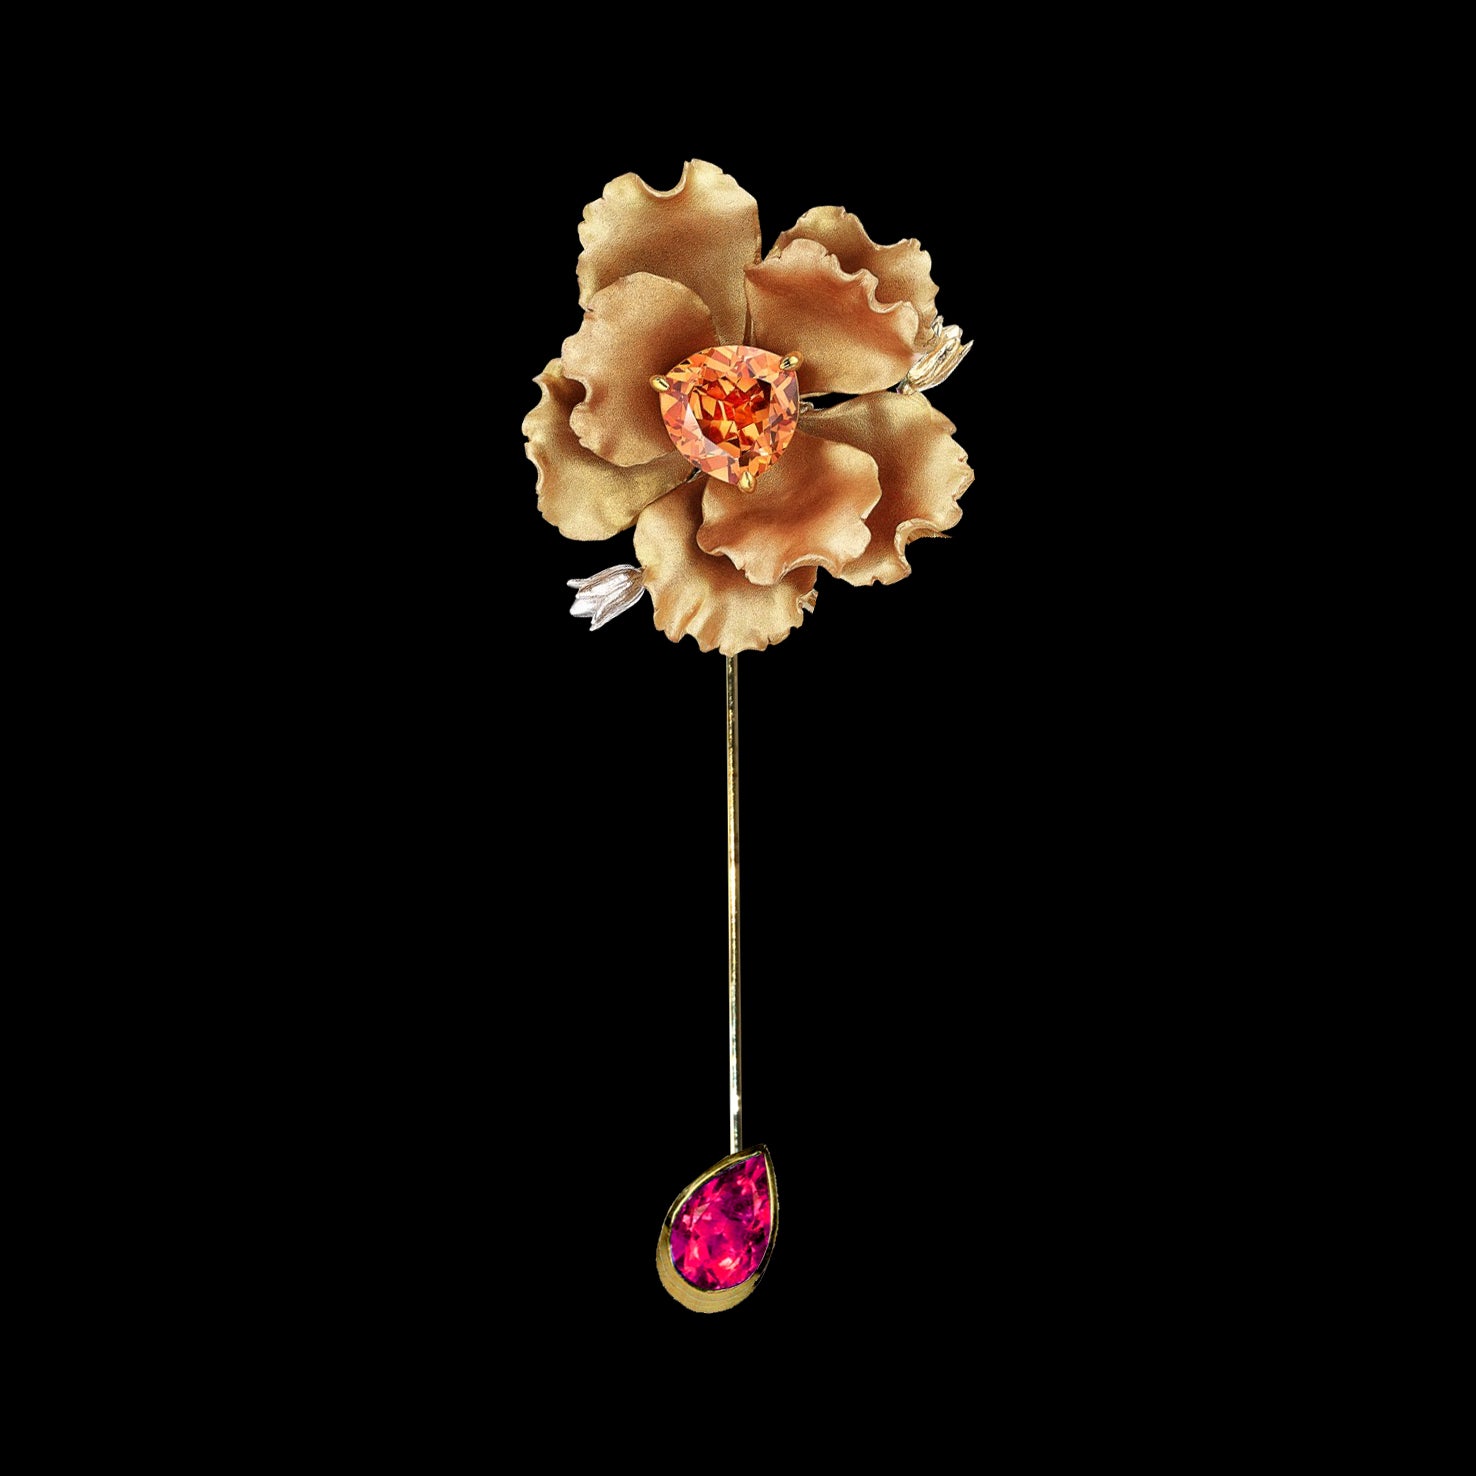 Citrine Parrot Bloom Pin, Brooch, Anabela Chan Joaillerie - Fine jewelry with laboratory grown and created gemstones hand-crafted in the United Kingdom. Anabela Chan Joaillerie is the first fine jewellery brand in the world to champion laboratory-grown and created gemstones with high jewellery design, artisanal craftsmanship and a focus on ethical and sustainable innovations.